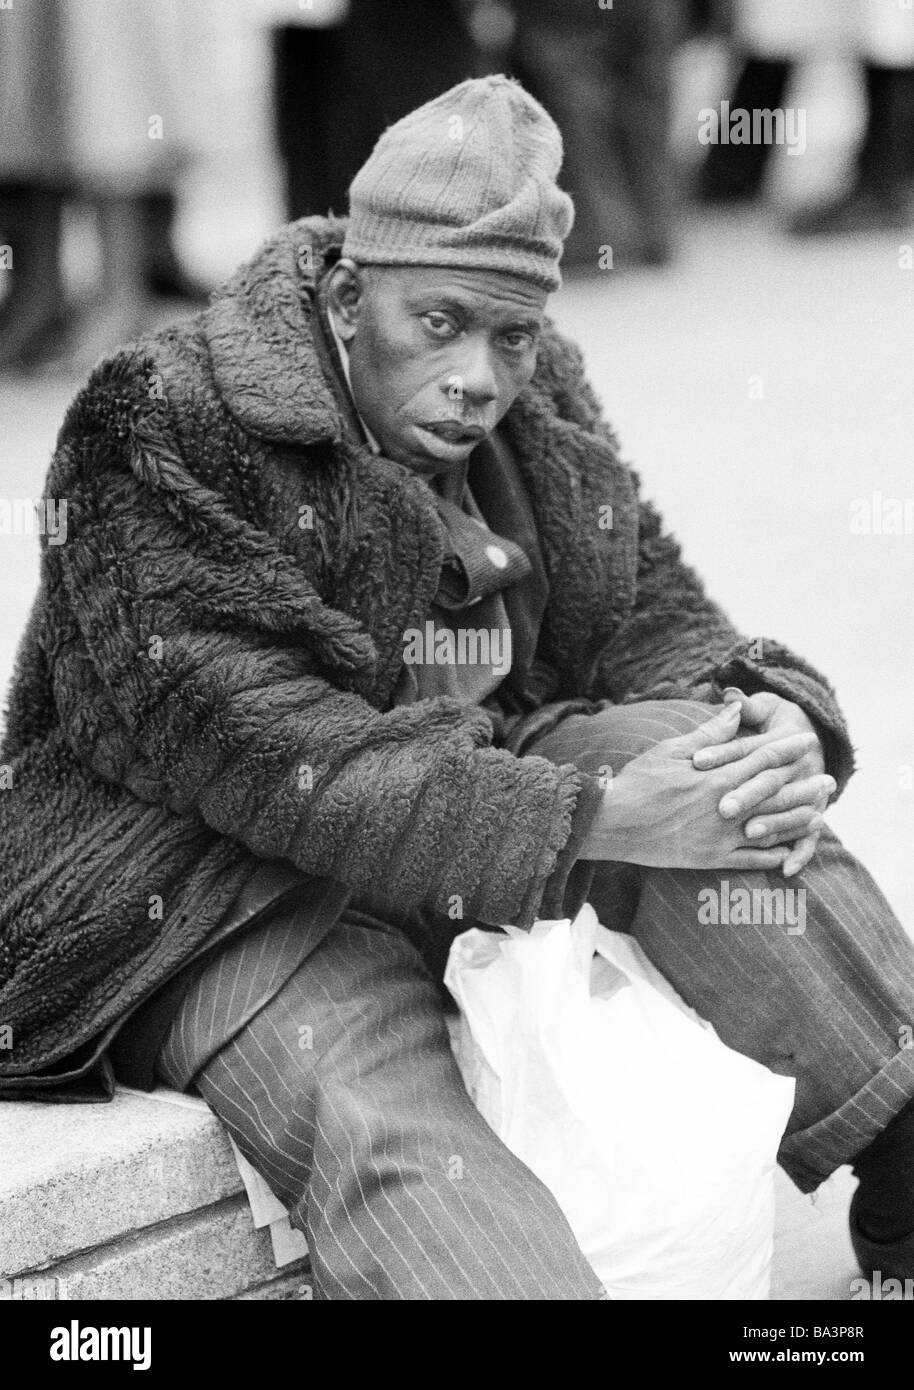 Seventies, black and white photo, people, black man wearing a fur coat and a woolly hat, aged 30 to 40 years, Great Britain, England, London Stock Photo